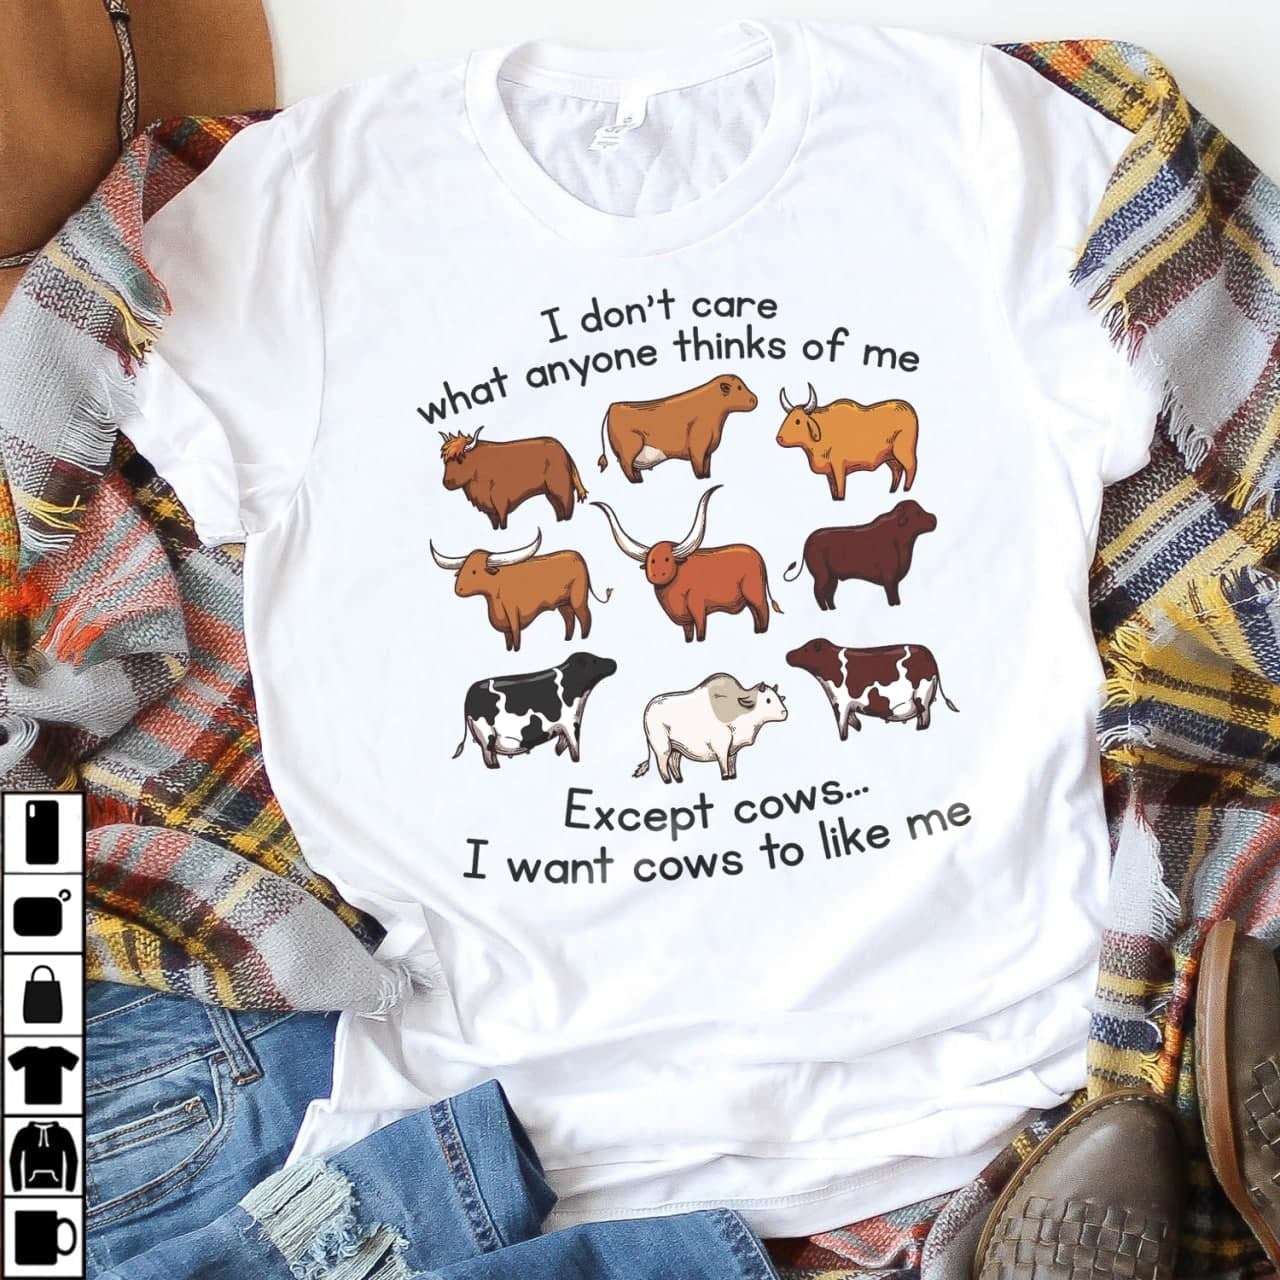 I Don’T Care What Anyone Thinks Of Me T-Shirt, Except Cows I Want Cows To Like Me Shirt, Funny Cow Heifer Shirt, Gift Shirt For Cow Lovers, Cow Lover Gifts, Cow Breed Shirt